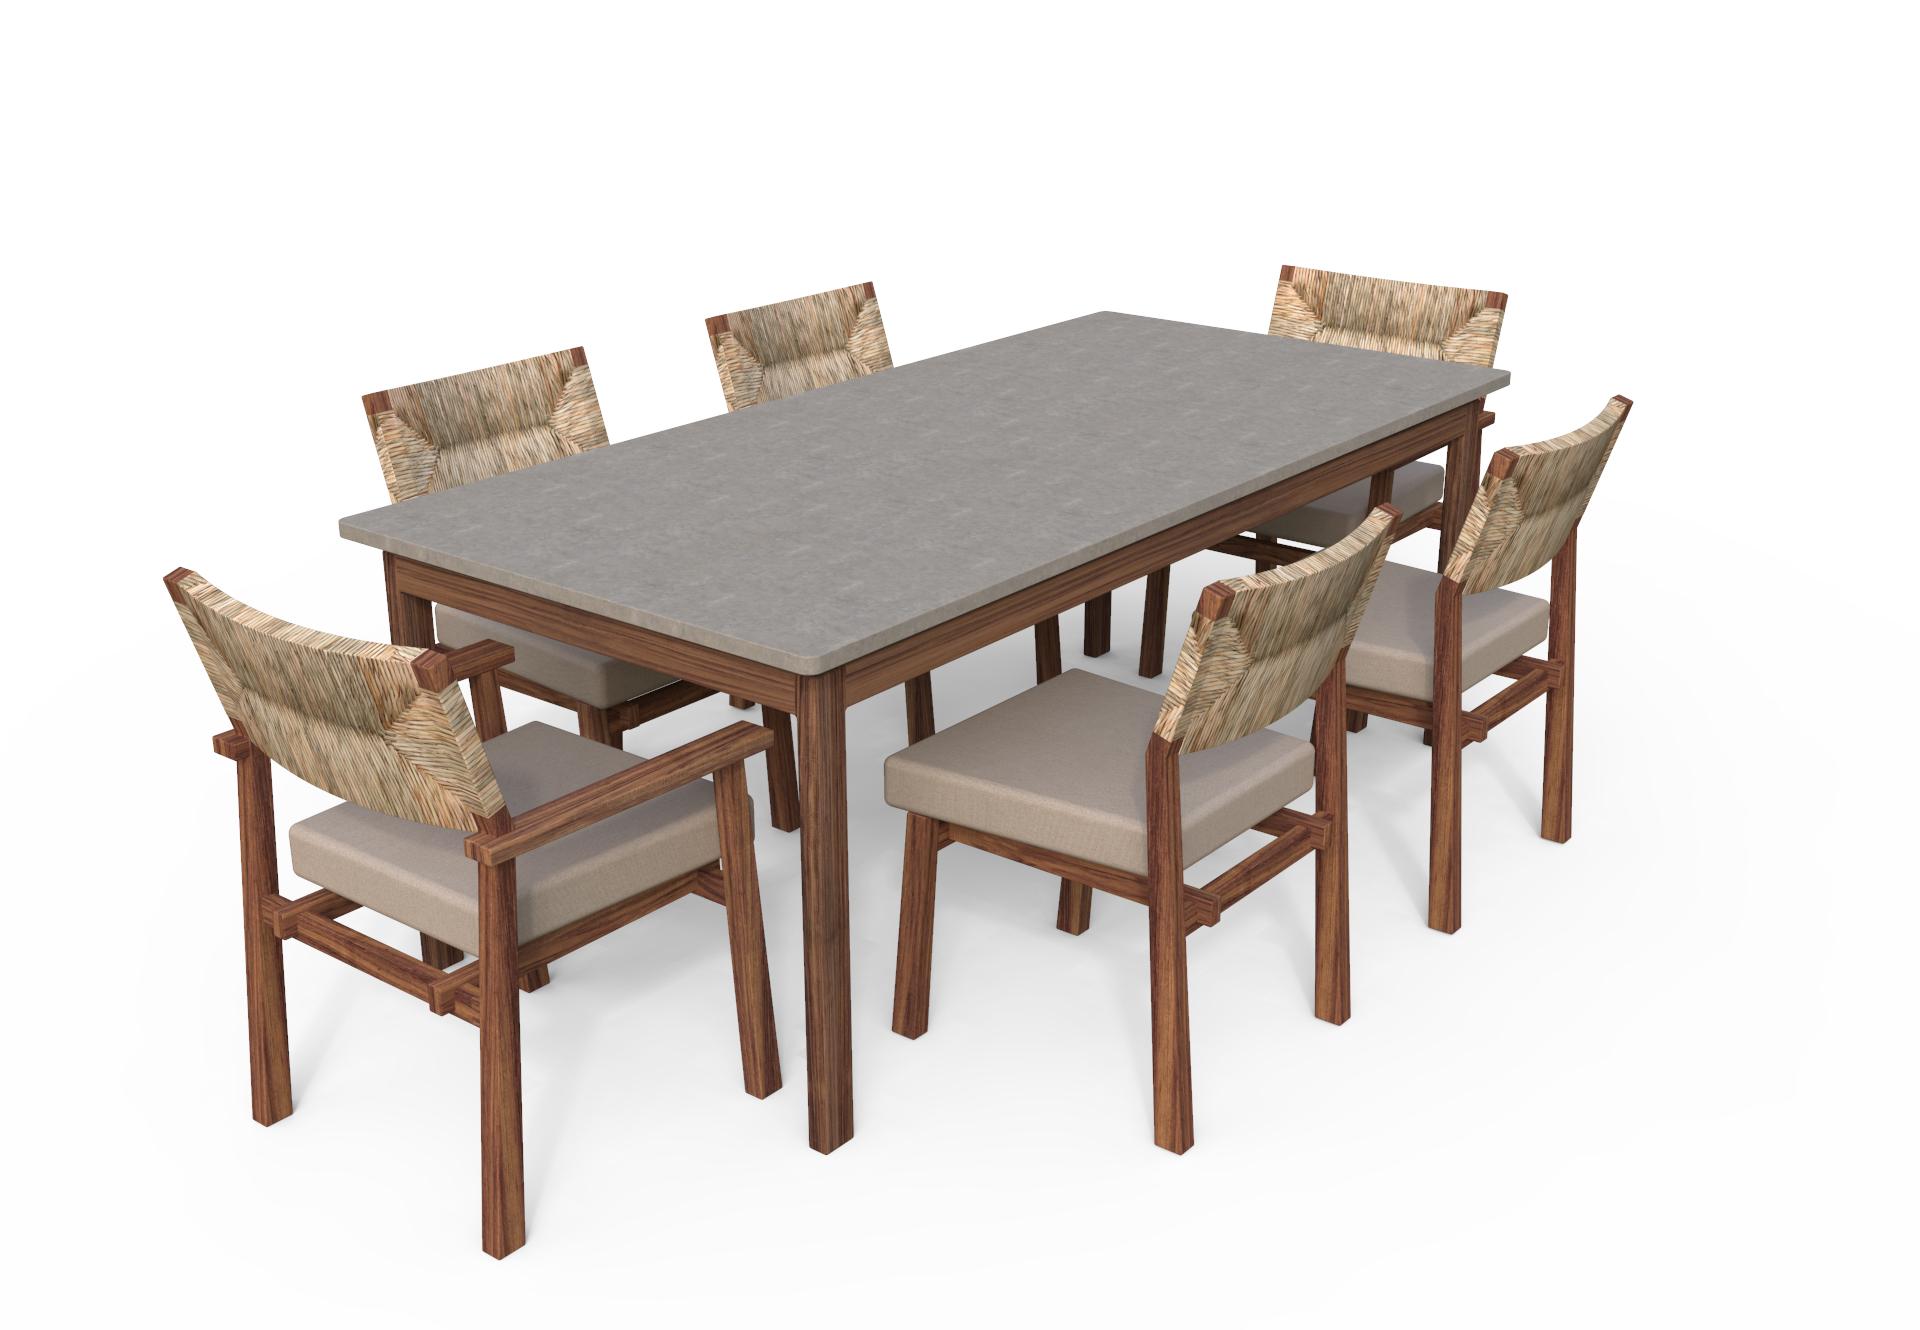 Woodwork Vieyra Dining Table with Viroc top, Contemporary Mexican Design